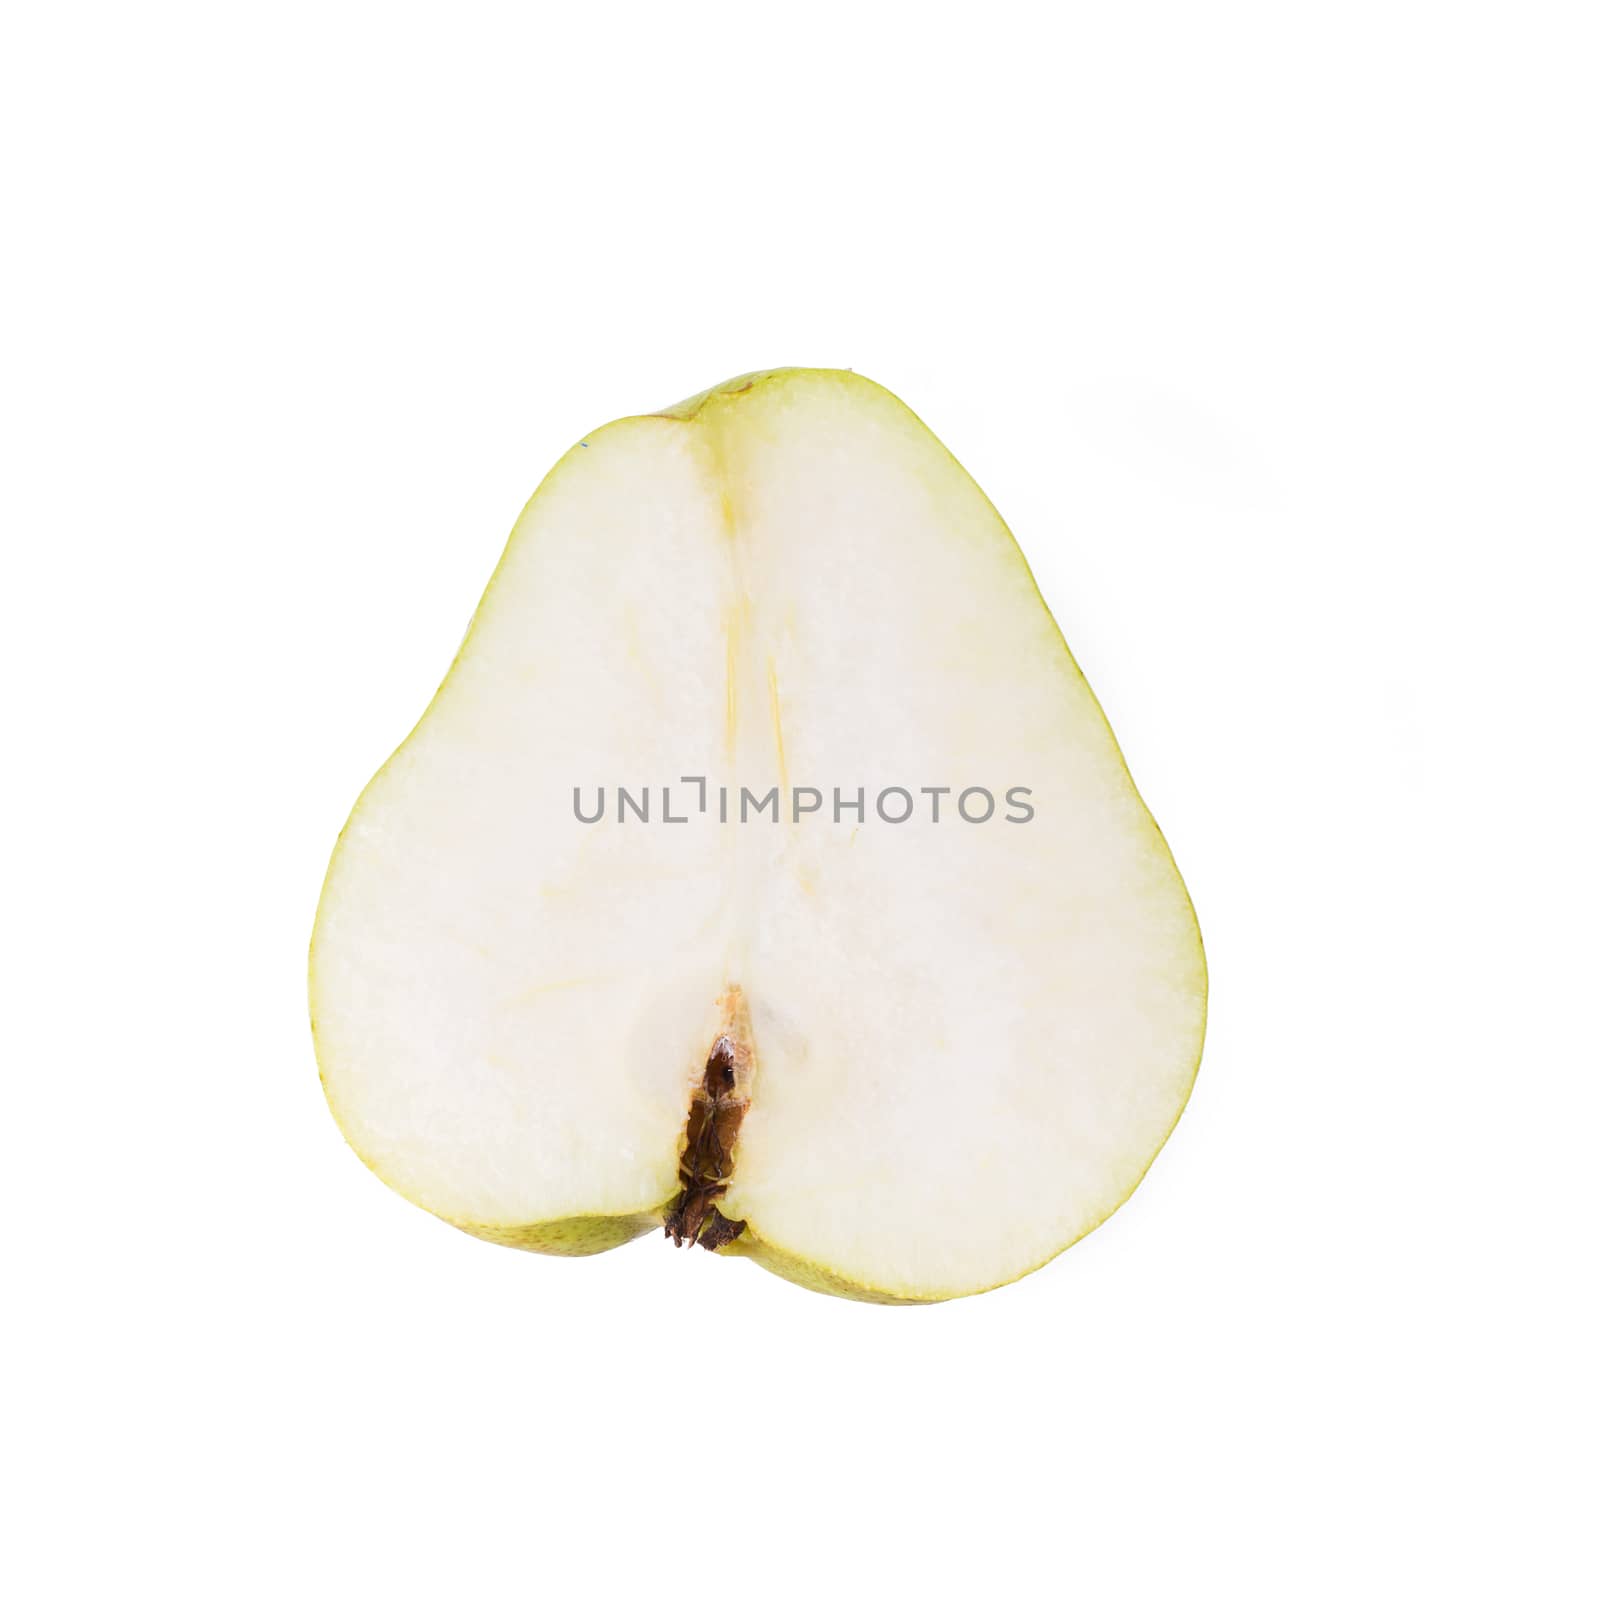 Pear with a cut isolated on white background.